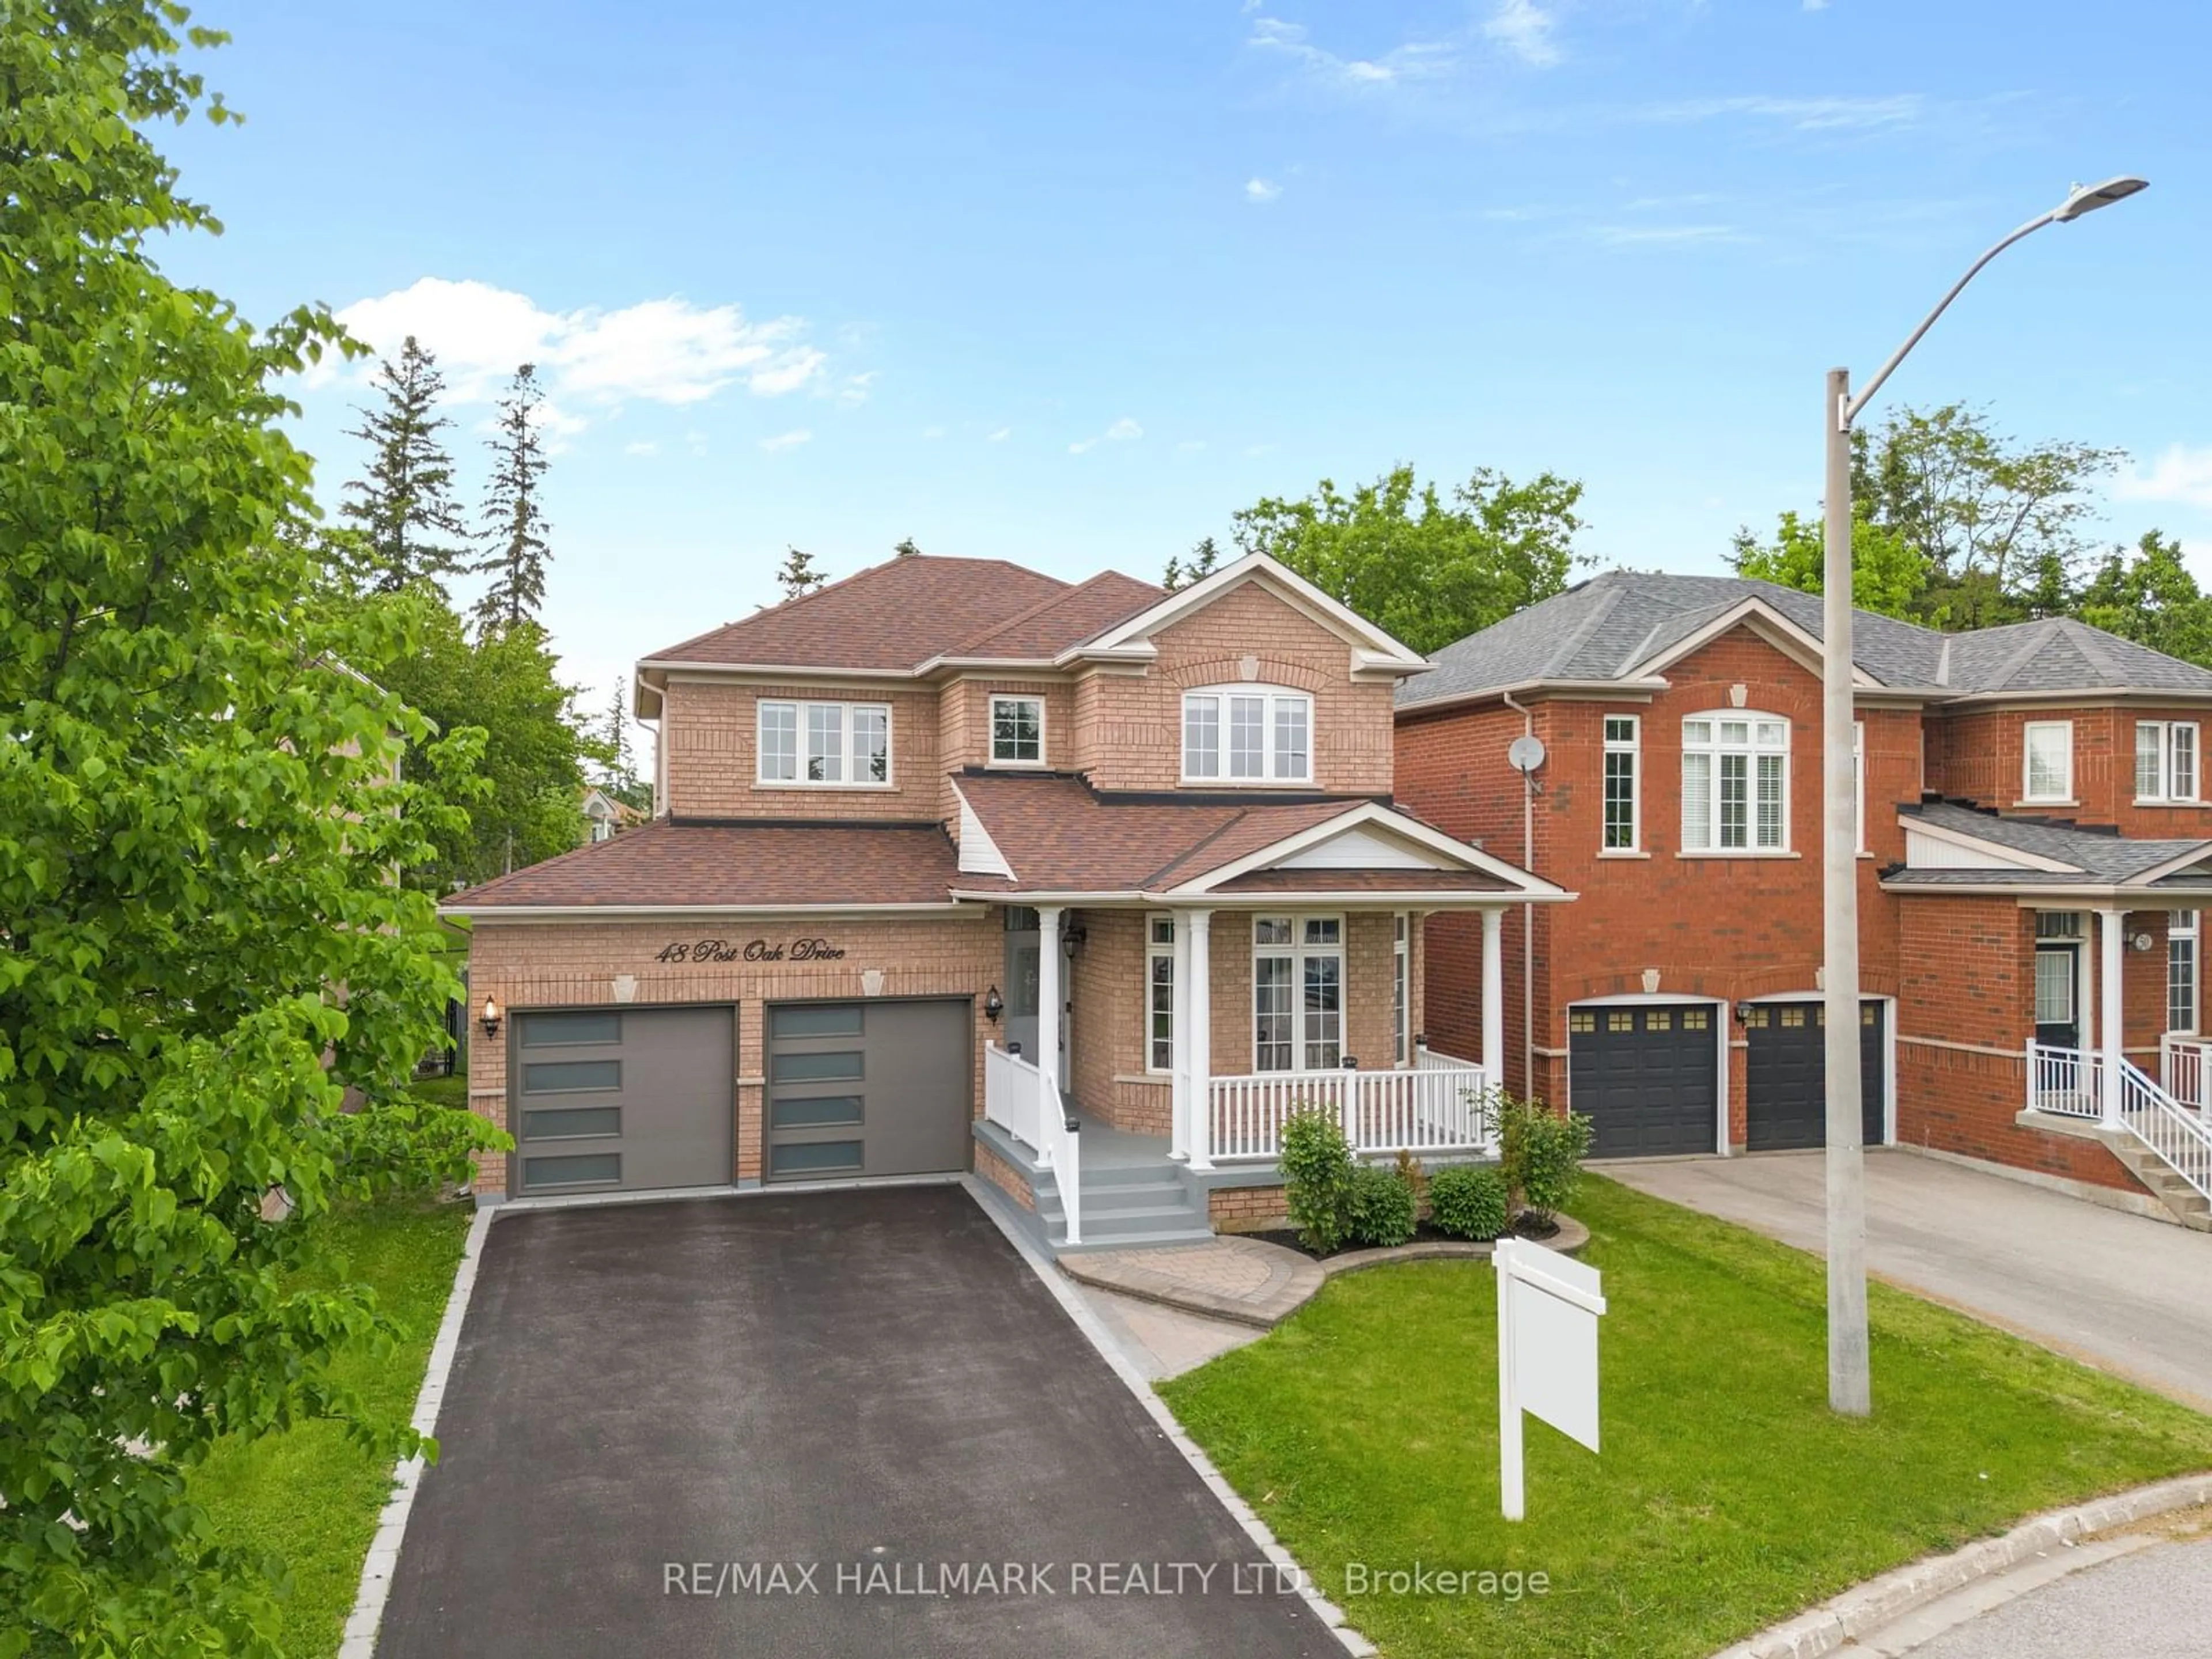 Home with brick exterior material for 48 Post Oak Dr, Richmond Hill Ontario L4E 4G9